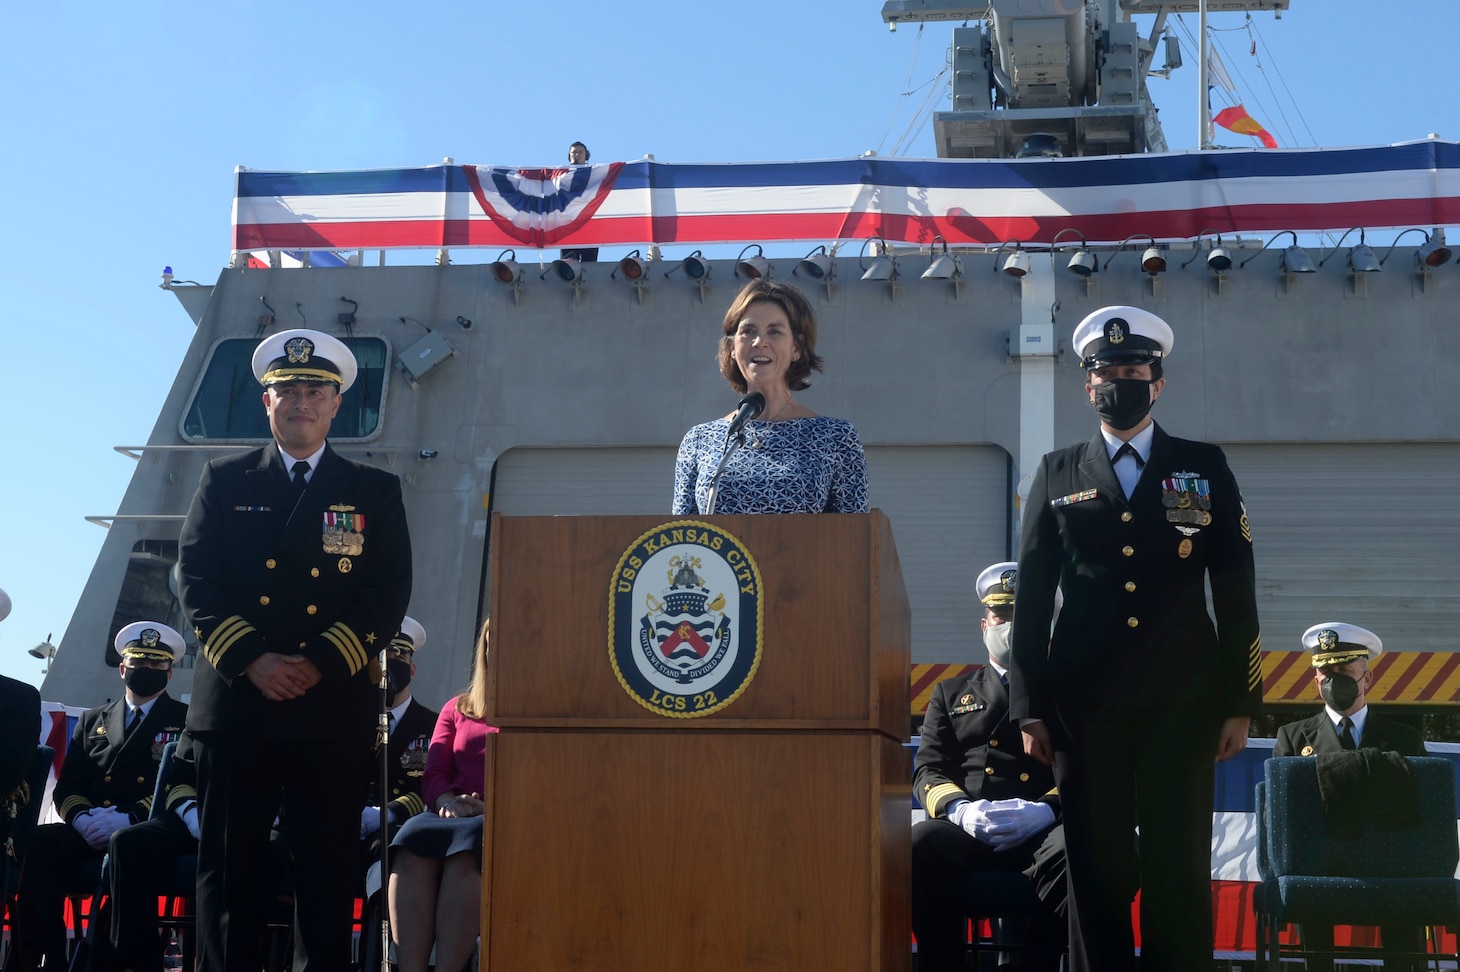 SAN DIEGO (Dec 17, 2021) Tracy Davidson, the ship sponsor of Independence-variant littoral combat ship USS Kansas City (LCS 22) delivers the order to man the ship and bring her to life during a commissioning commemoration ceremony on the flight deck. The Navy commissioned LCS 22, the second ship in naval history to be named Kansas City, via naval message due to public health safety and restrictions of large public events related to the novel coronavirus (COVID-19) pandemic. Kansas City is homeported at Naval Base San Diego. (U.S. Navy photo by Mass Communication Specialist 2nd Class Vance Hand/Released)